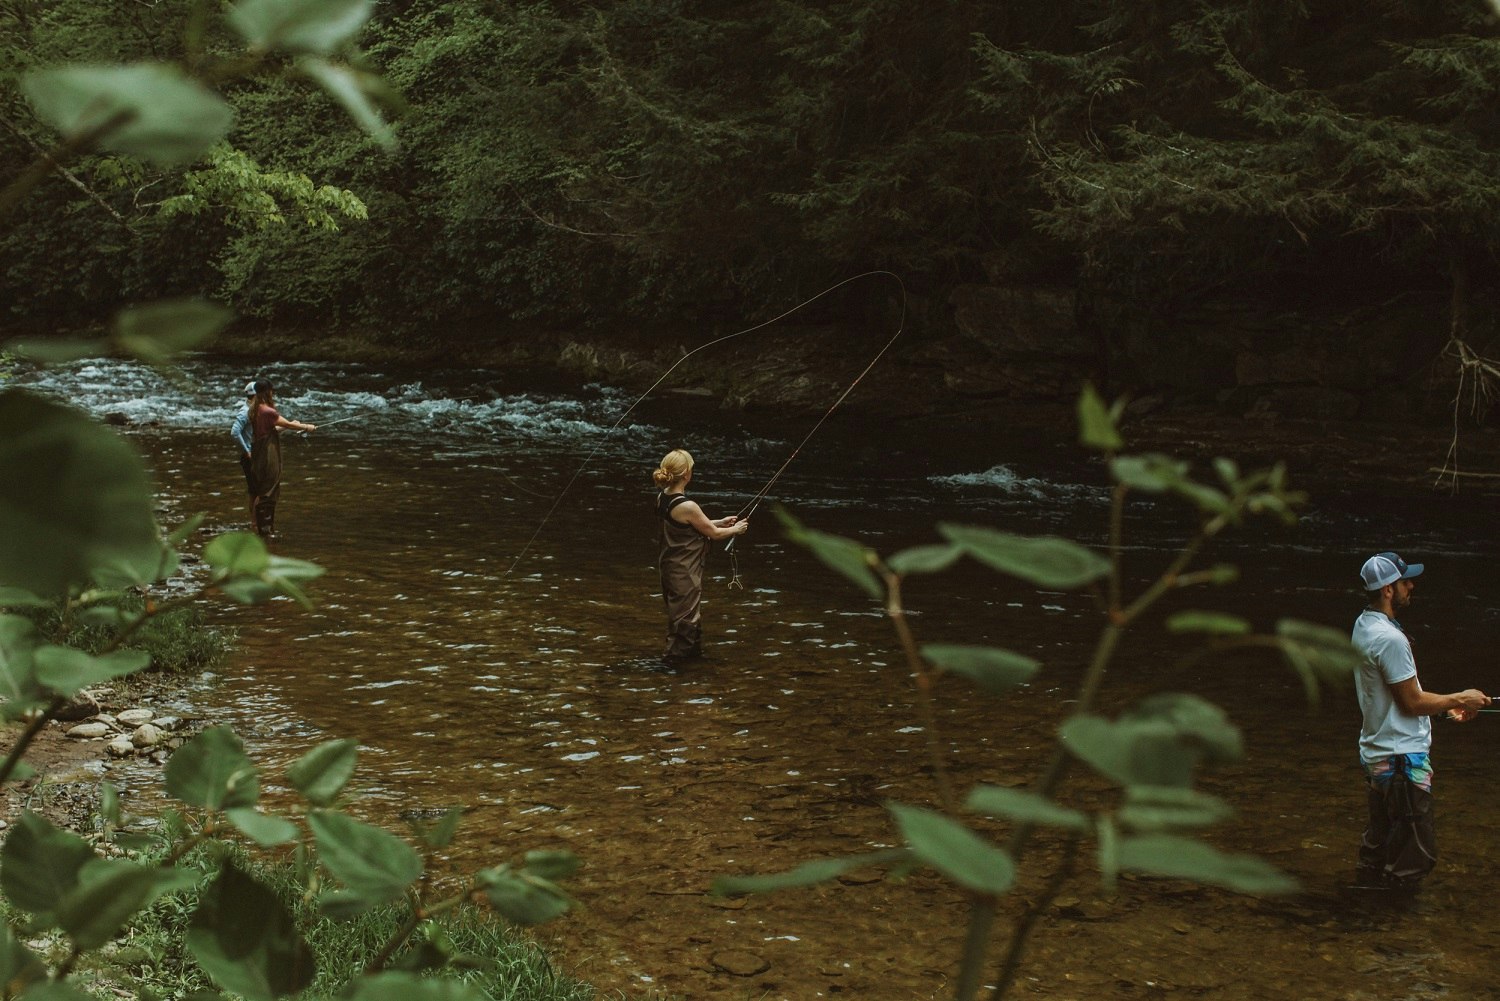 An aerial view of some people standing in a river in the Catskills Mountains fly fishing. Leaves and other foliage frames the shot.